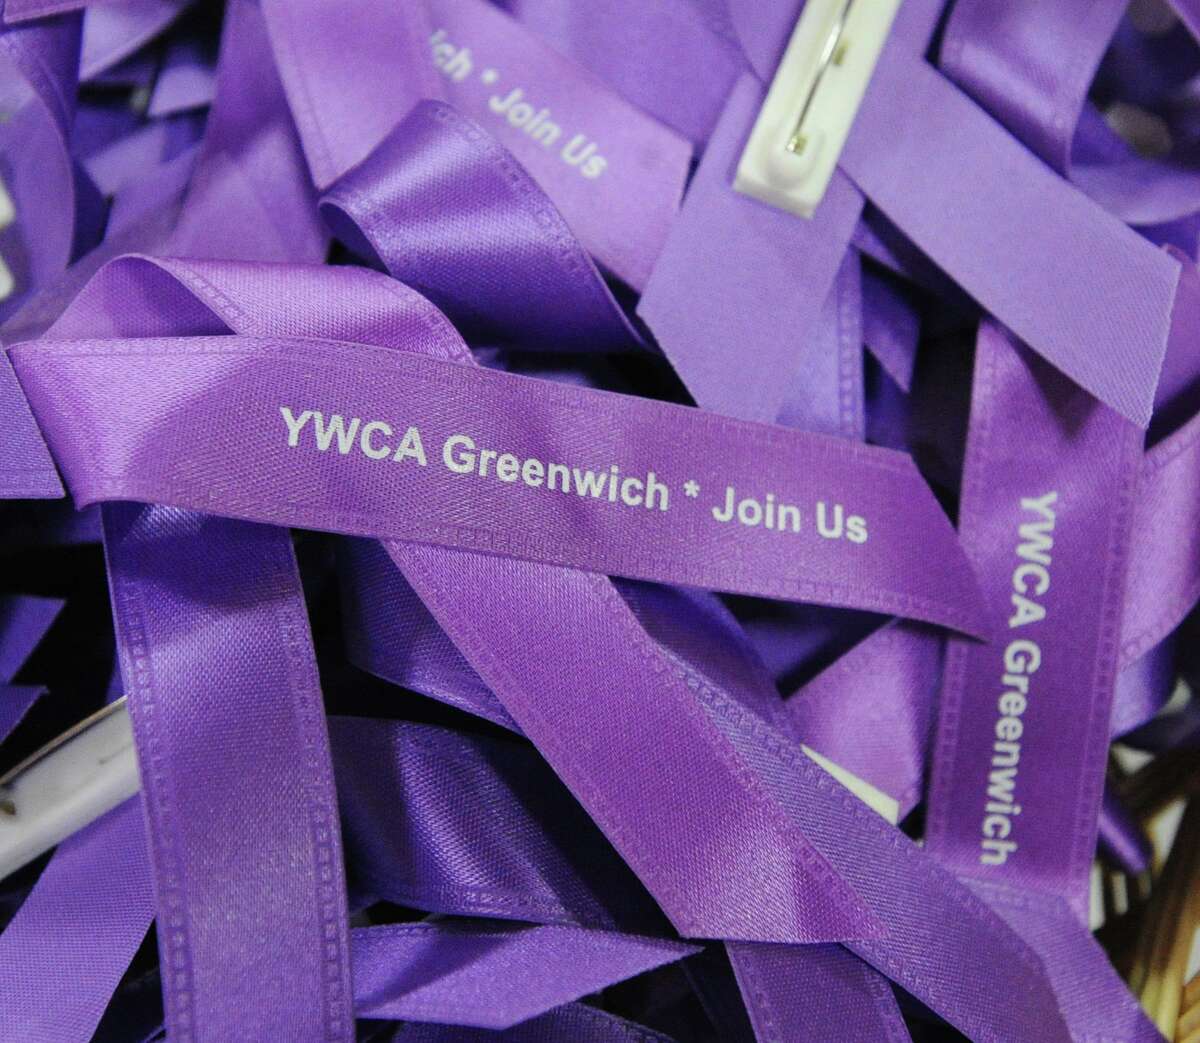 Domestic Violence Awareness and Prevention Month - YWCA - Greenwich